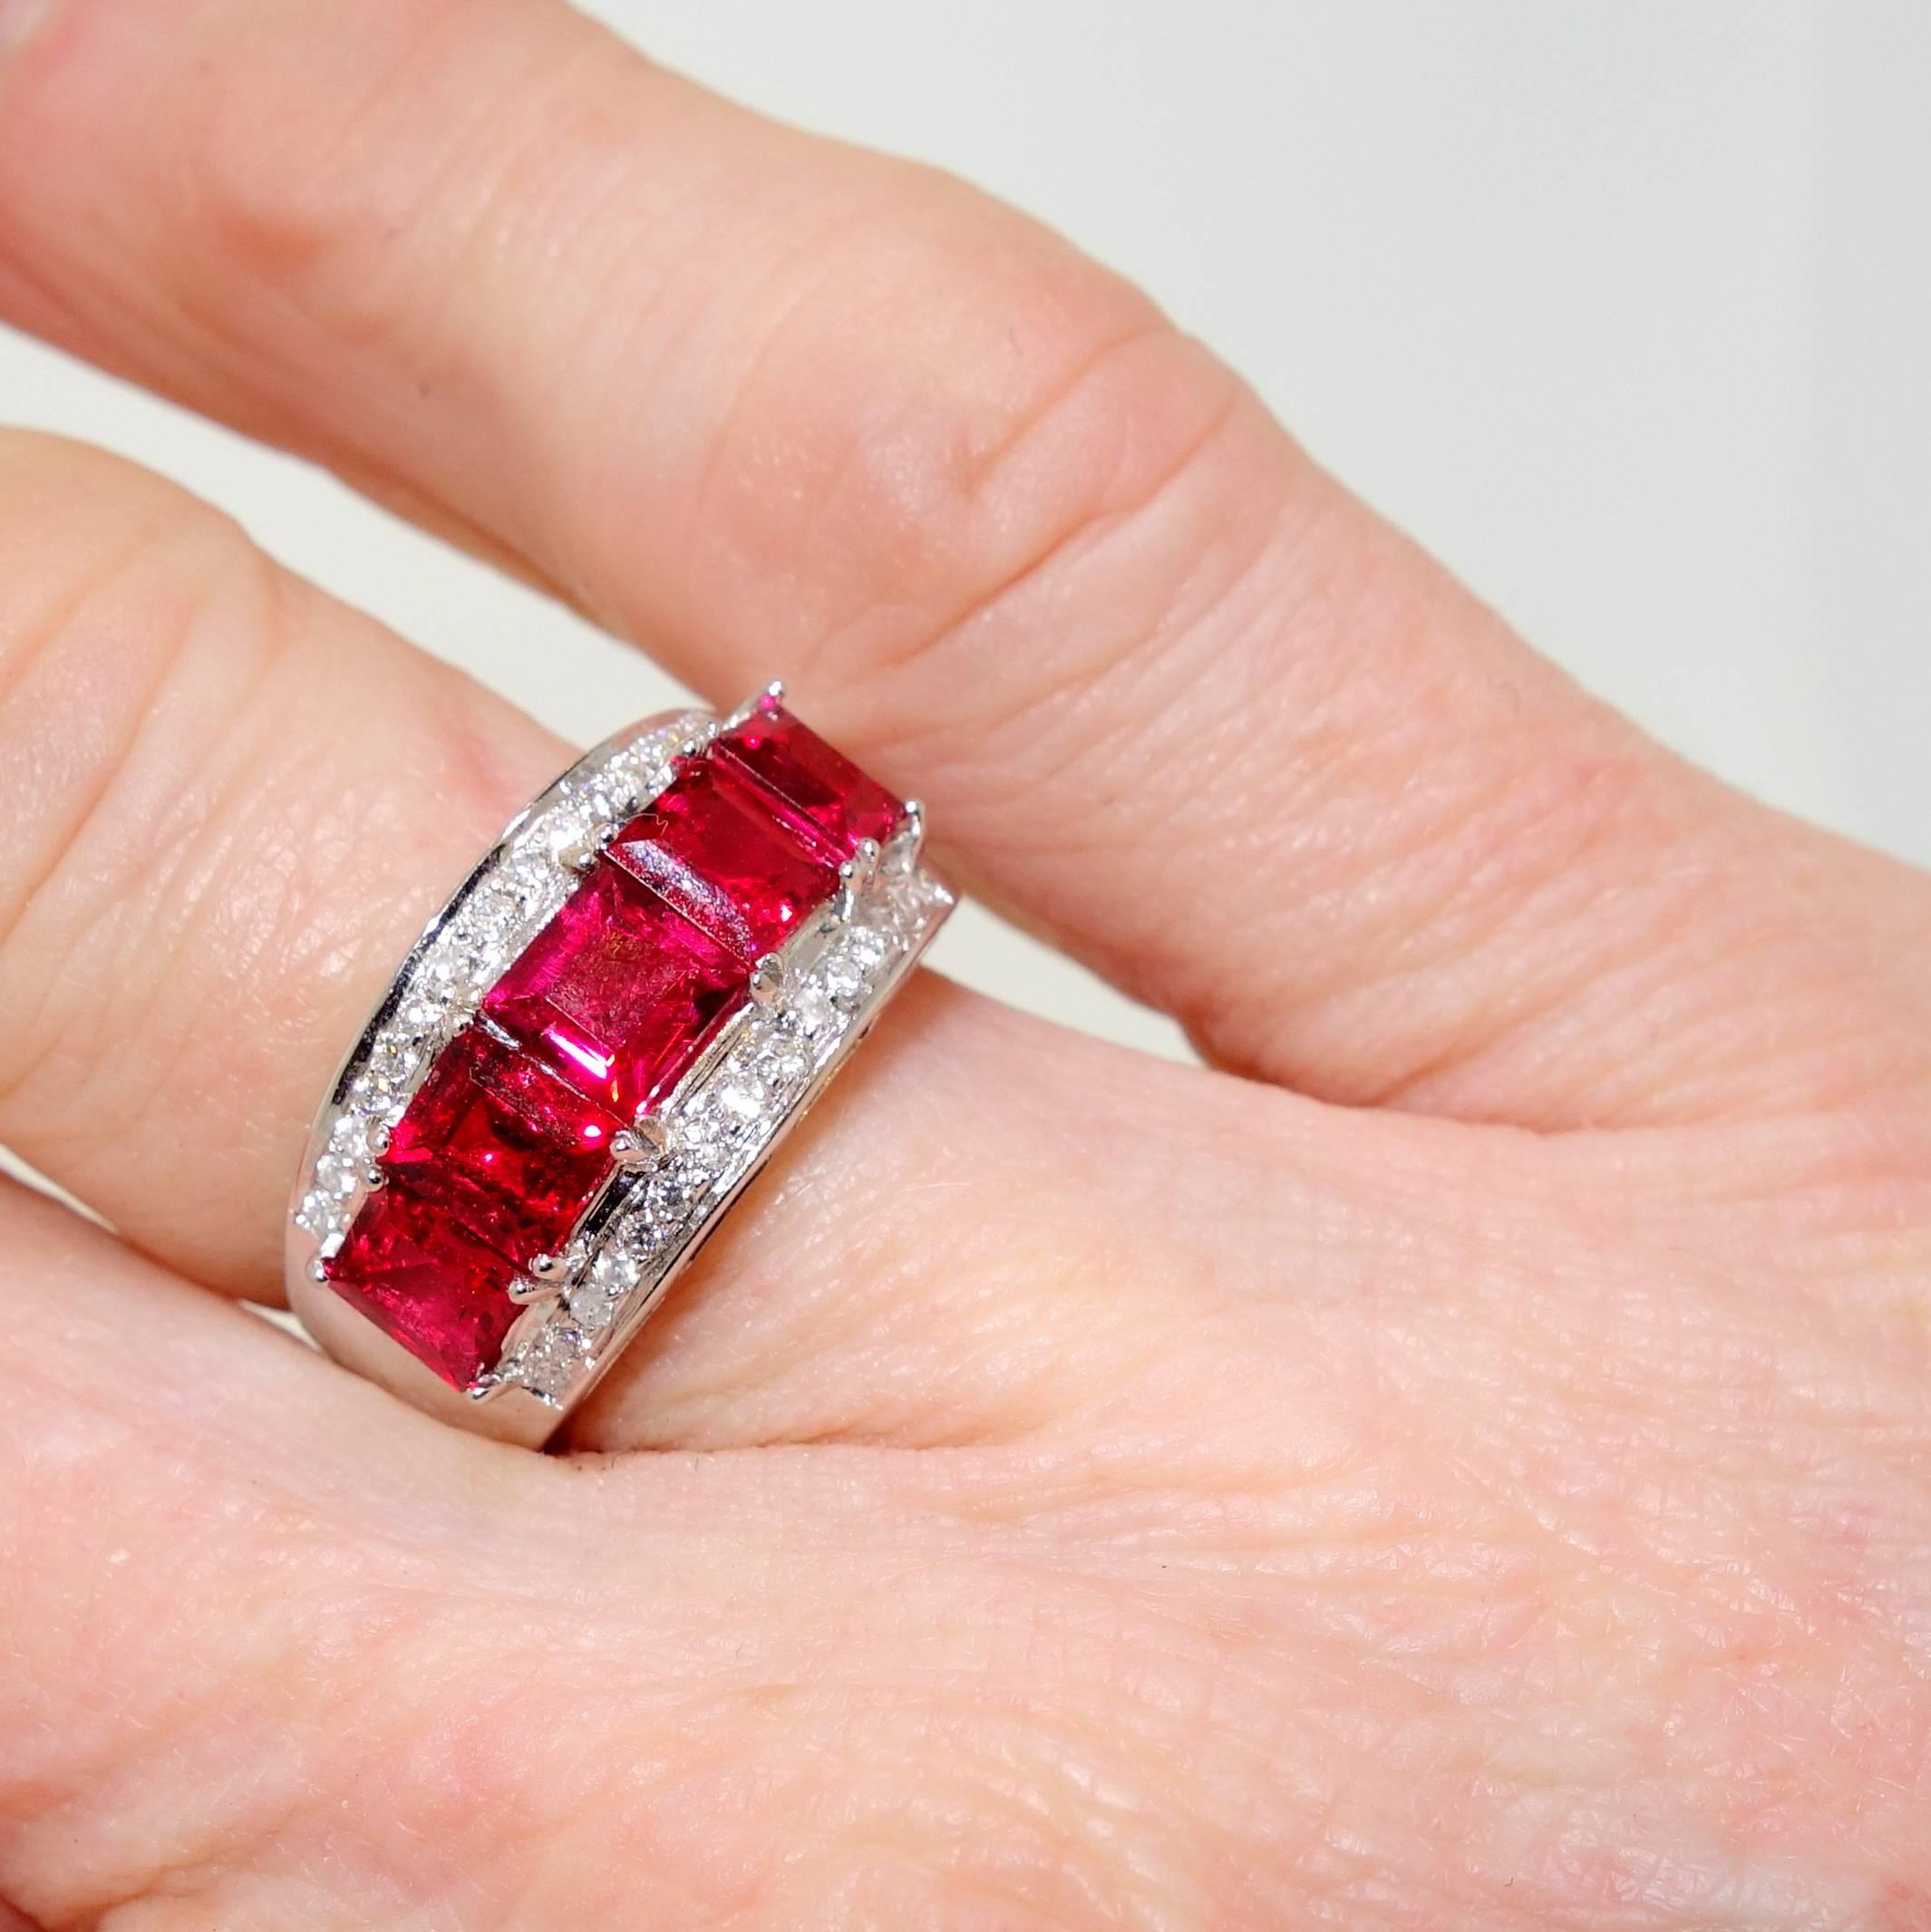 Women's Diamond and Natural Fine Burma Spinel Band Ring